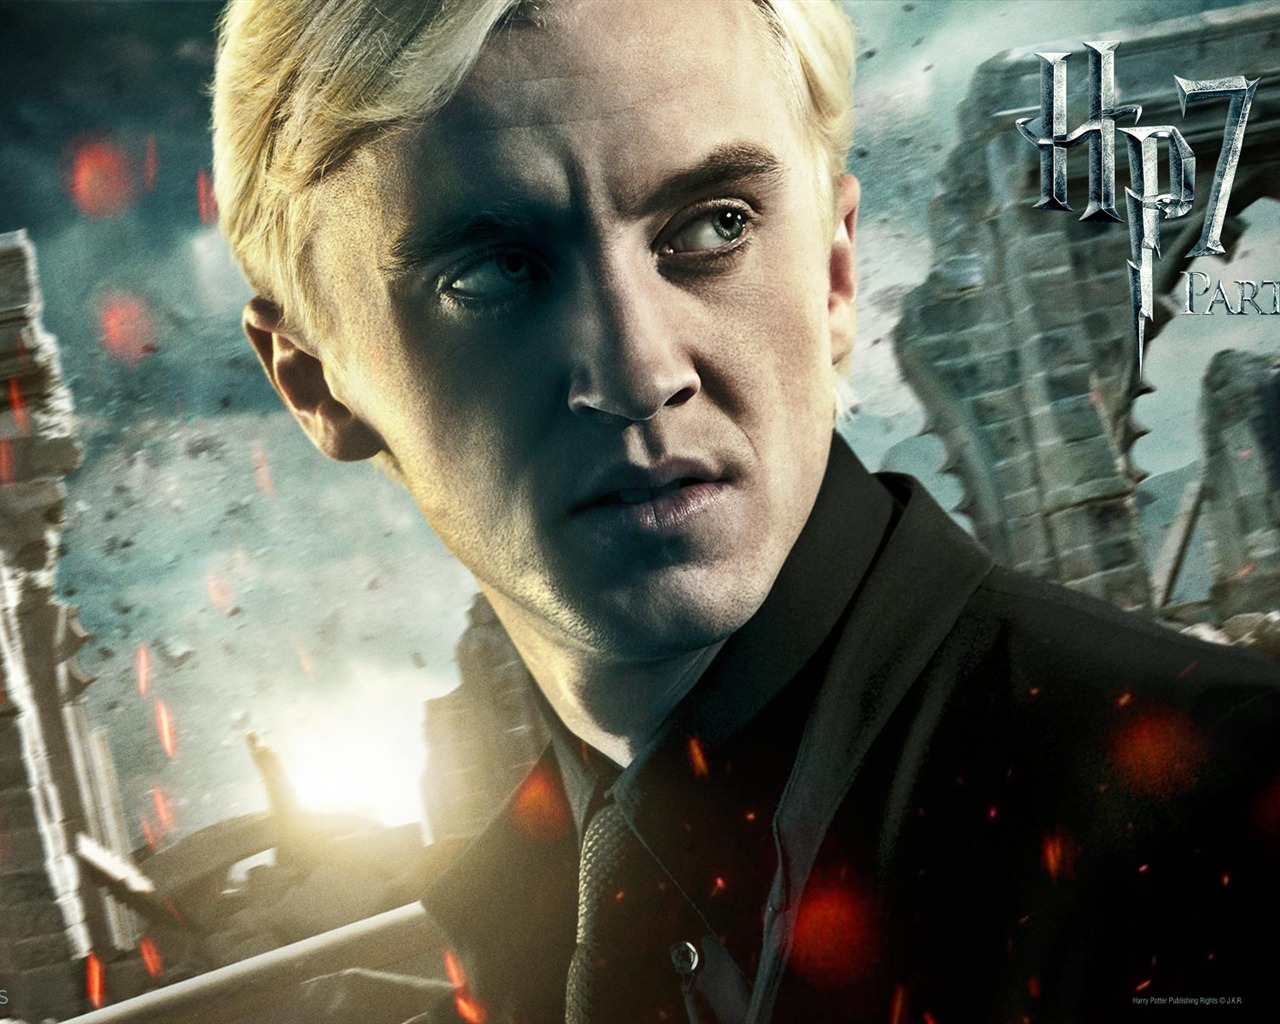 2011 Harry Potter and the Deathly Hallows HD wallpapers #11 - 1280x1024